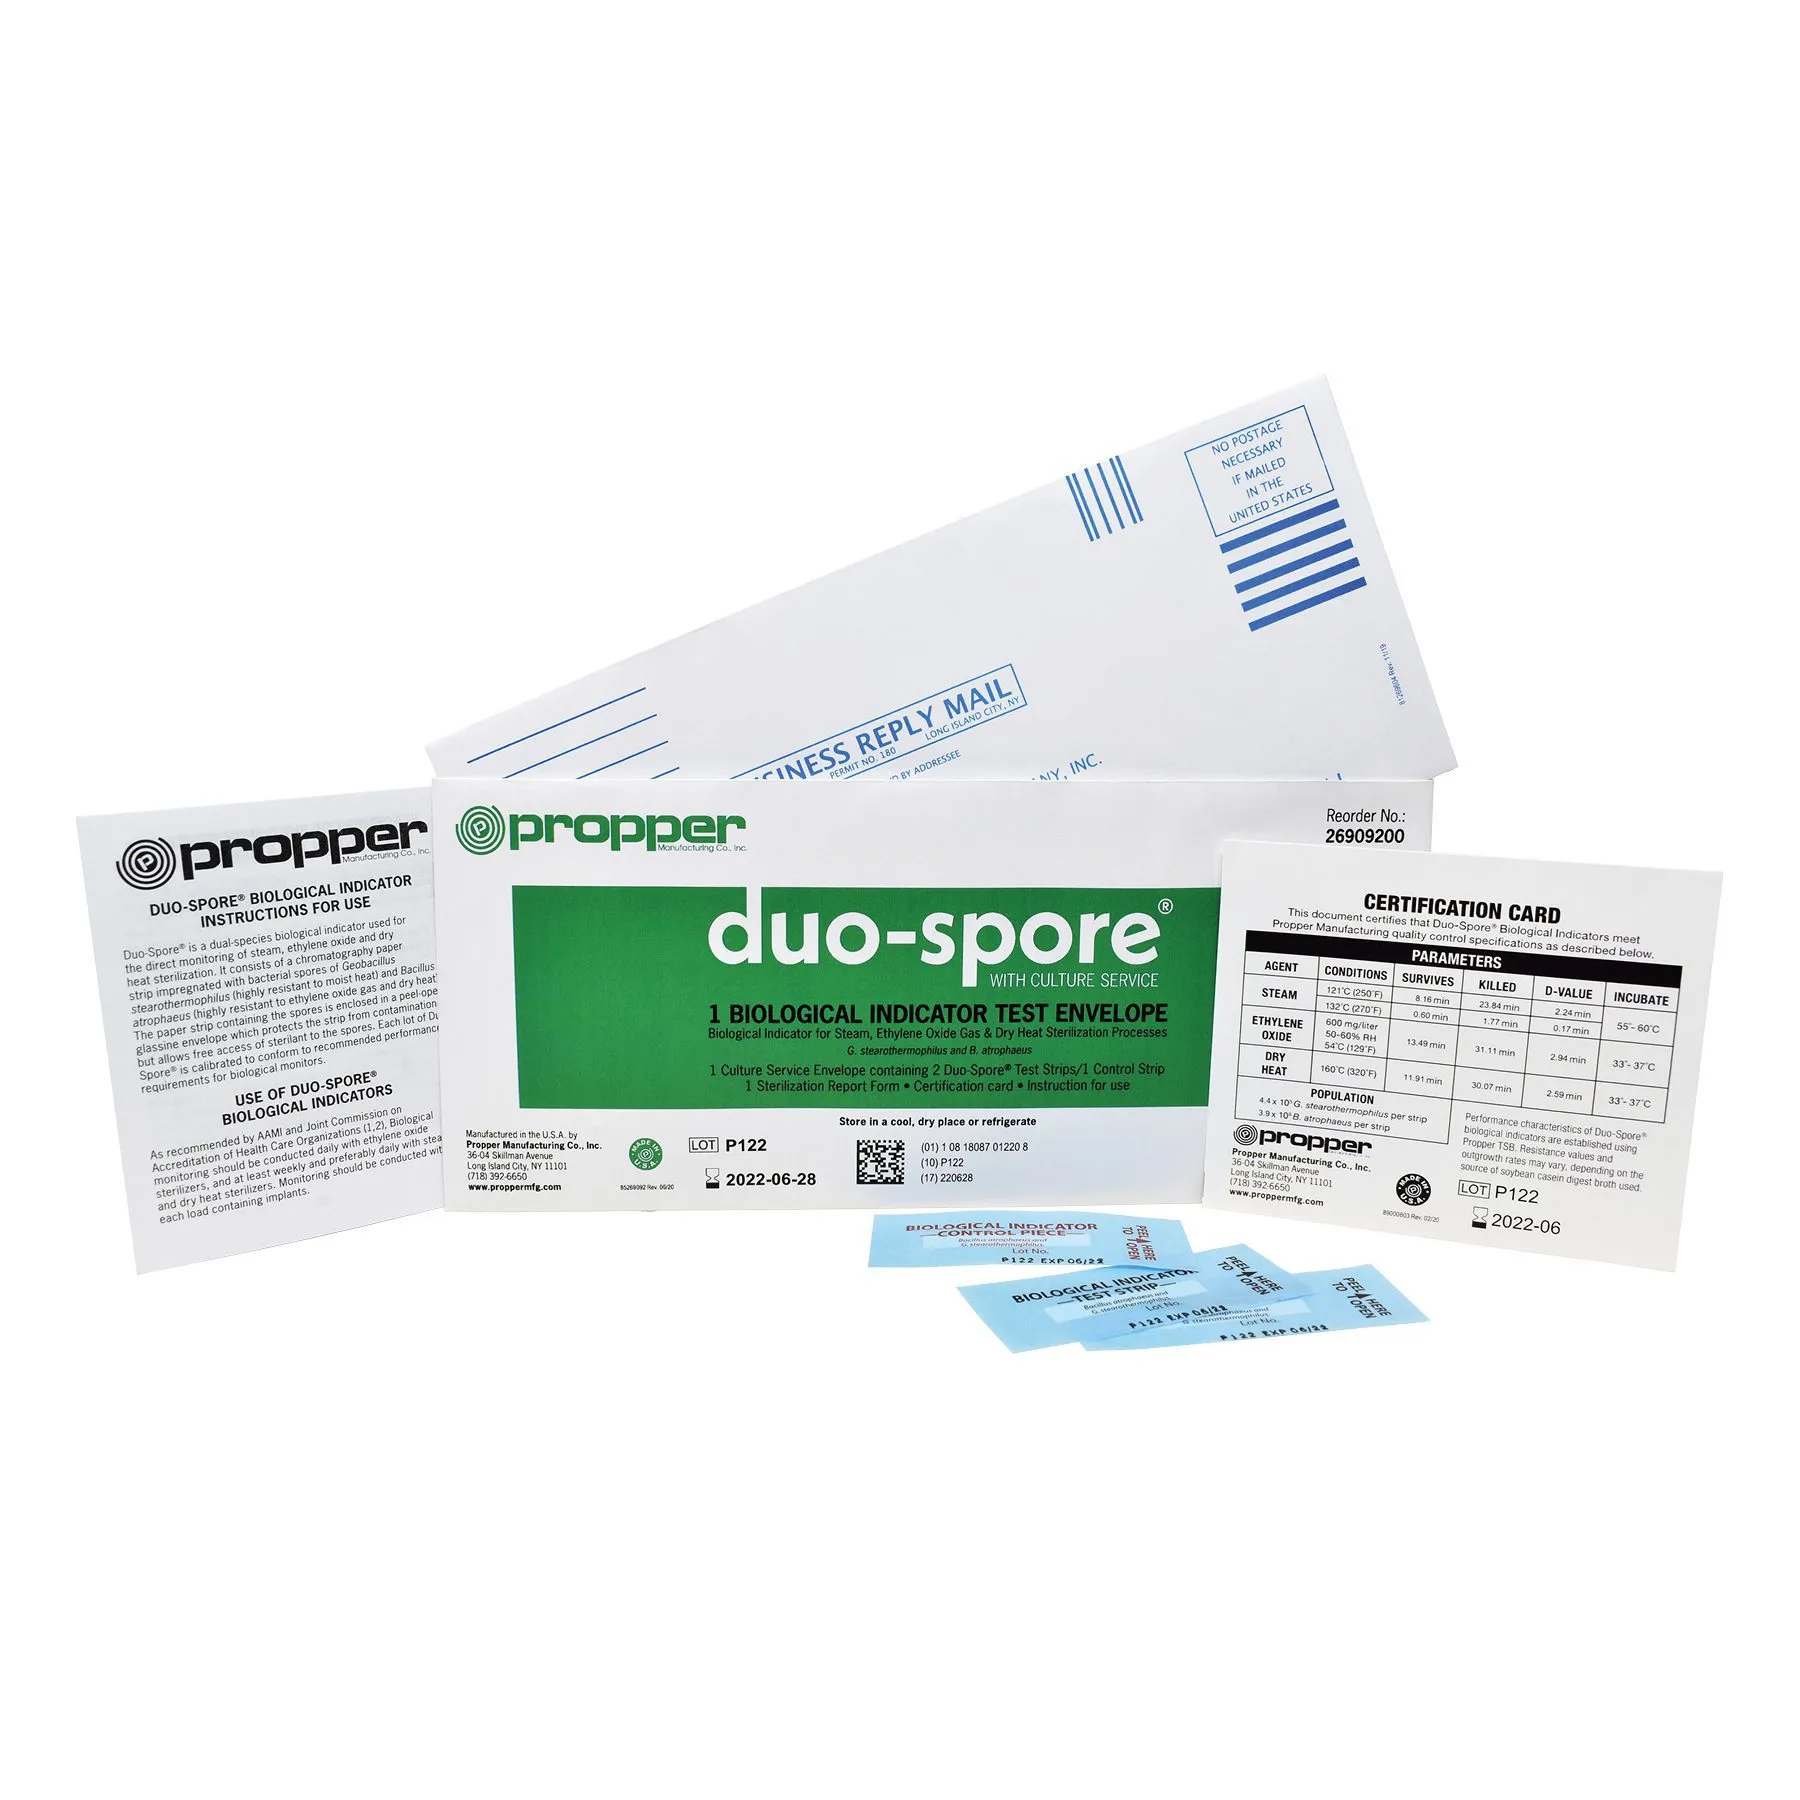 Propper - From: 26909200 To: 26909400 - Manufacturing Duo Spore Biological Indicator Test W/ Culture Service